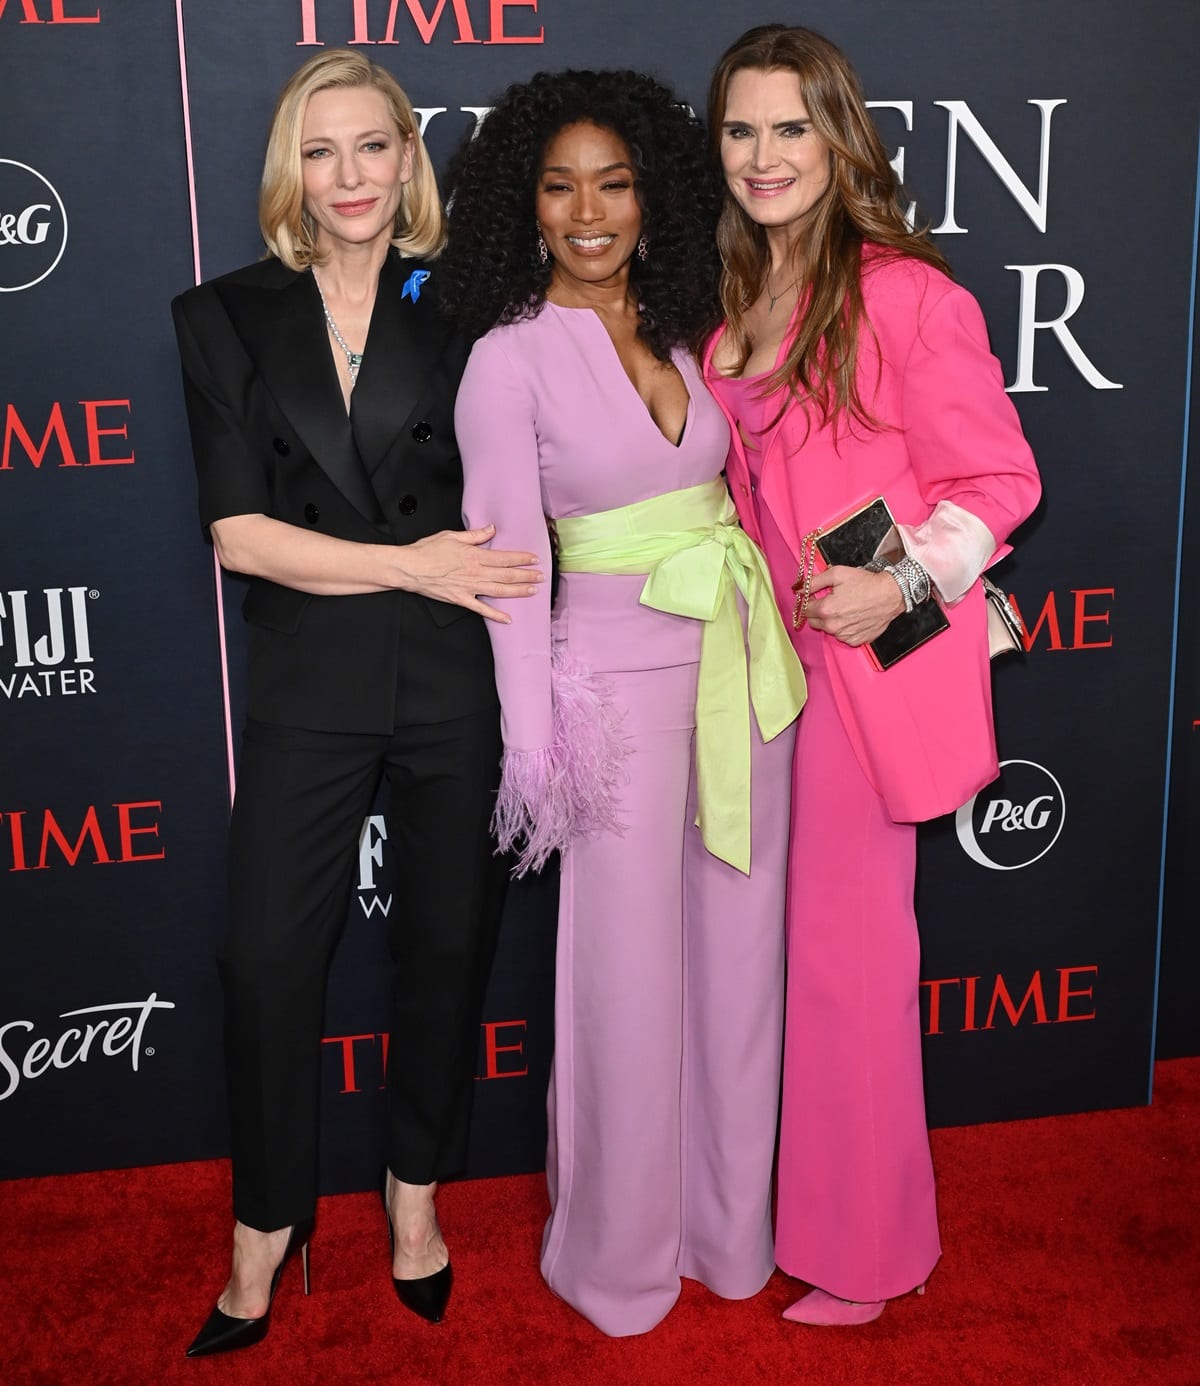 At TIME's 2nd Annual Women of the Year Gala in 2023, Brooke Shields stood the tallest at 5ft 10 ½ inches (179.1 cm), followed by Cate Blanchett at 5ft 8 ¼ inches (173.4 cm), and Angela Bassett at 5ft 3 ½ inches (161.3 cm)